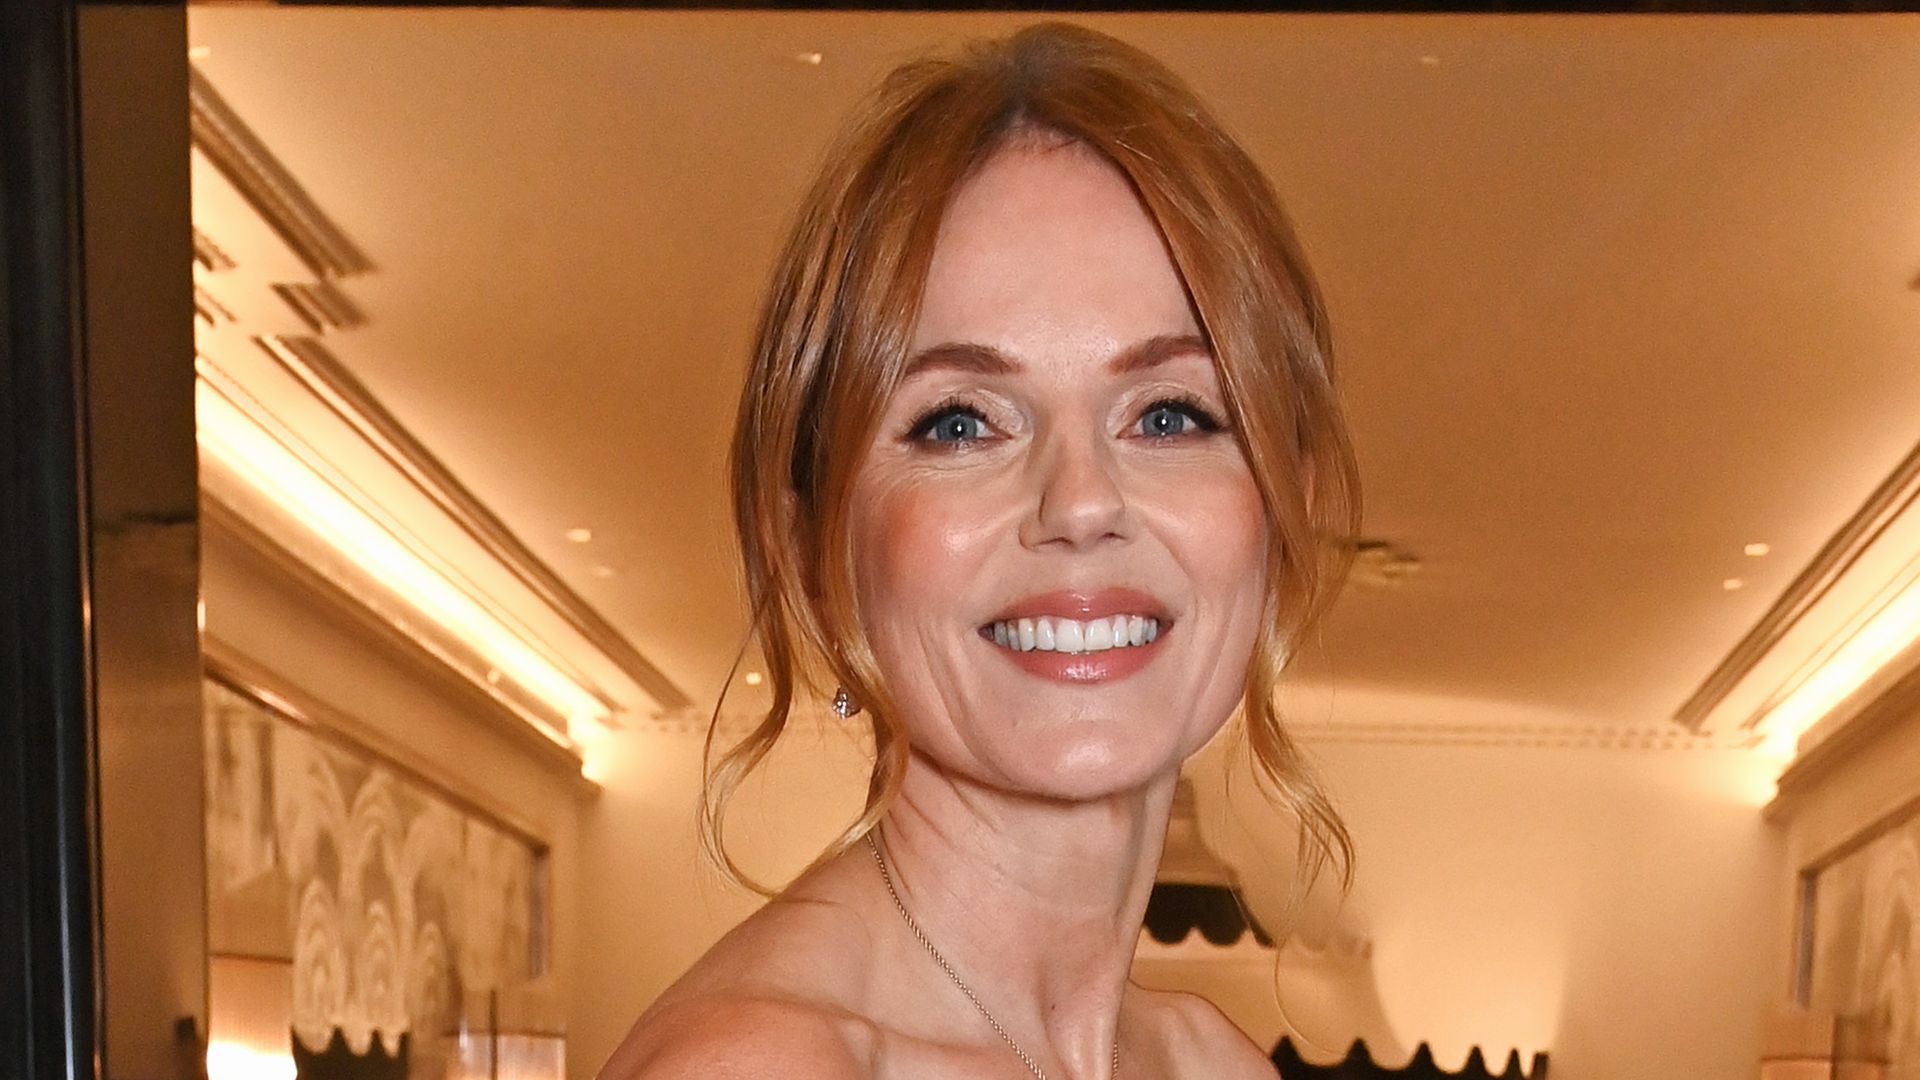 Geri Halliwell-Horner with hand on her hip in floral gown